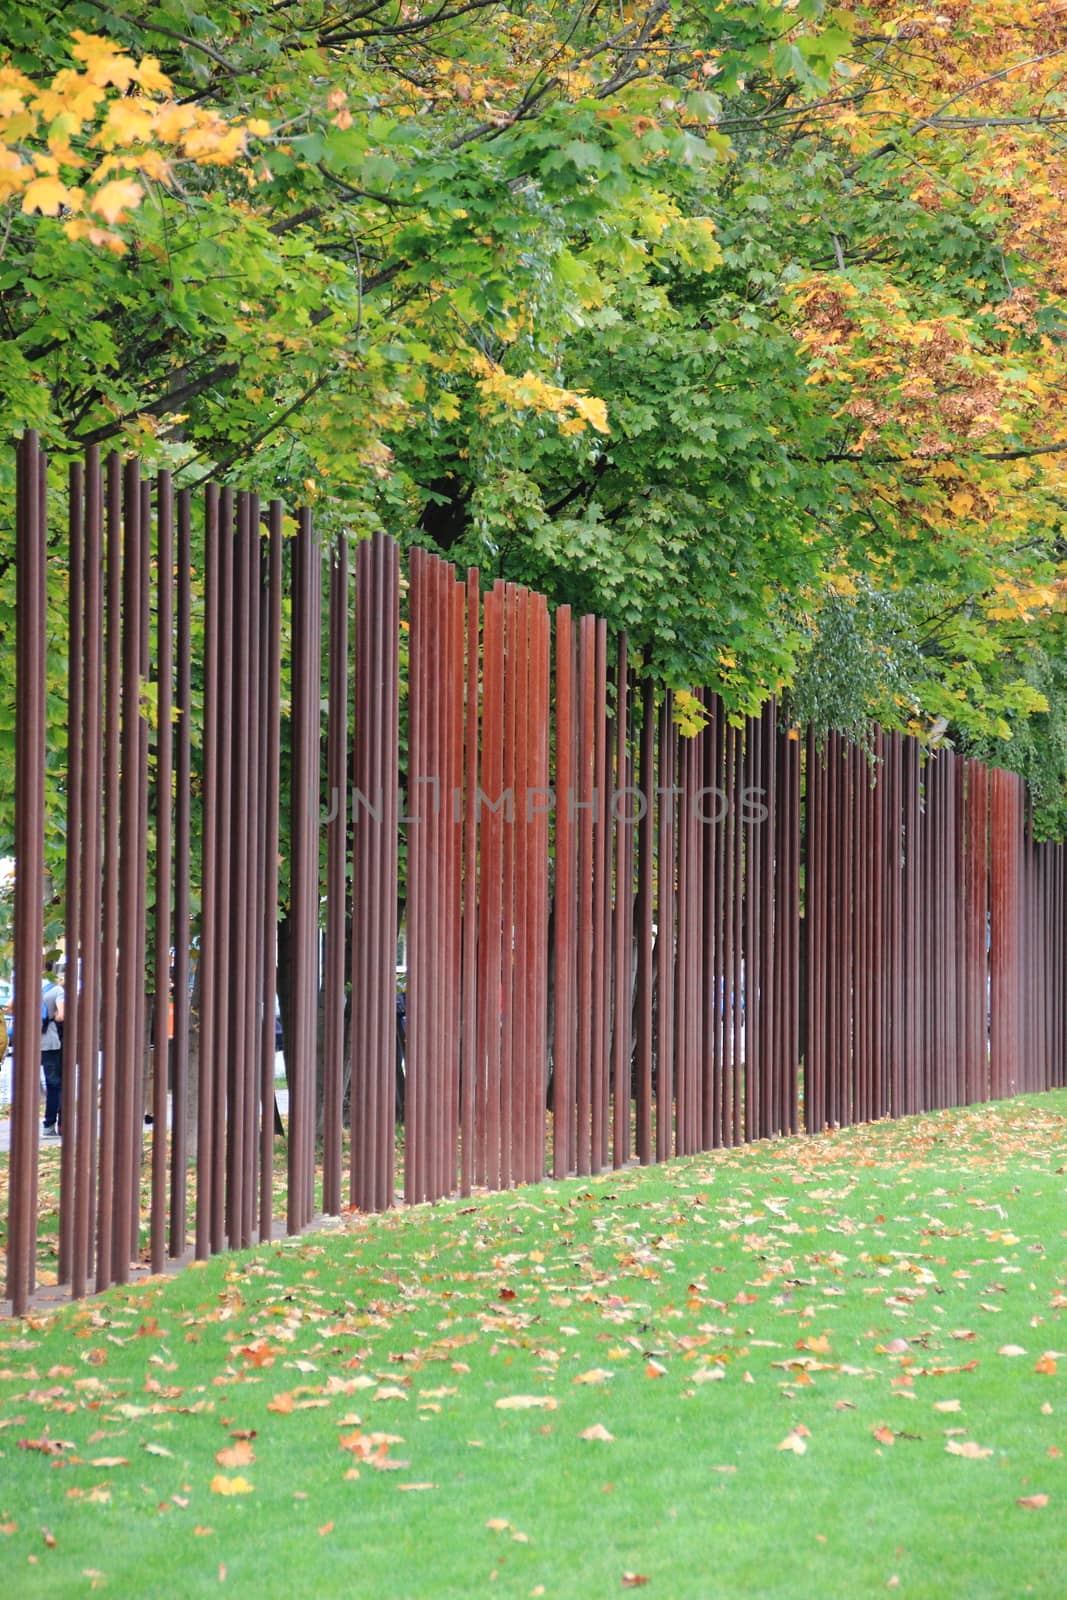 Berlin wall memorial Germany with iron markers  in autumn